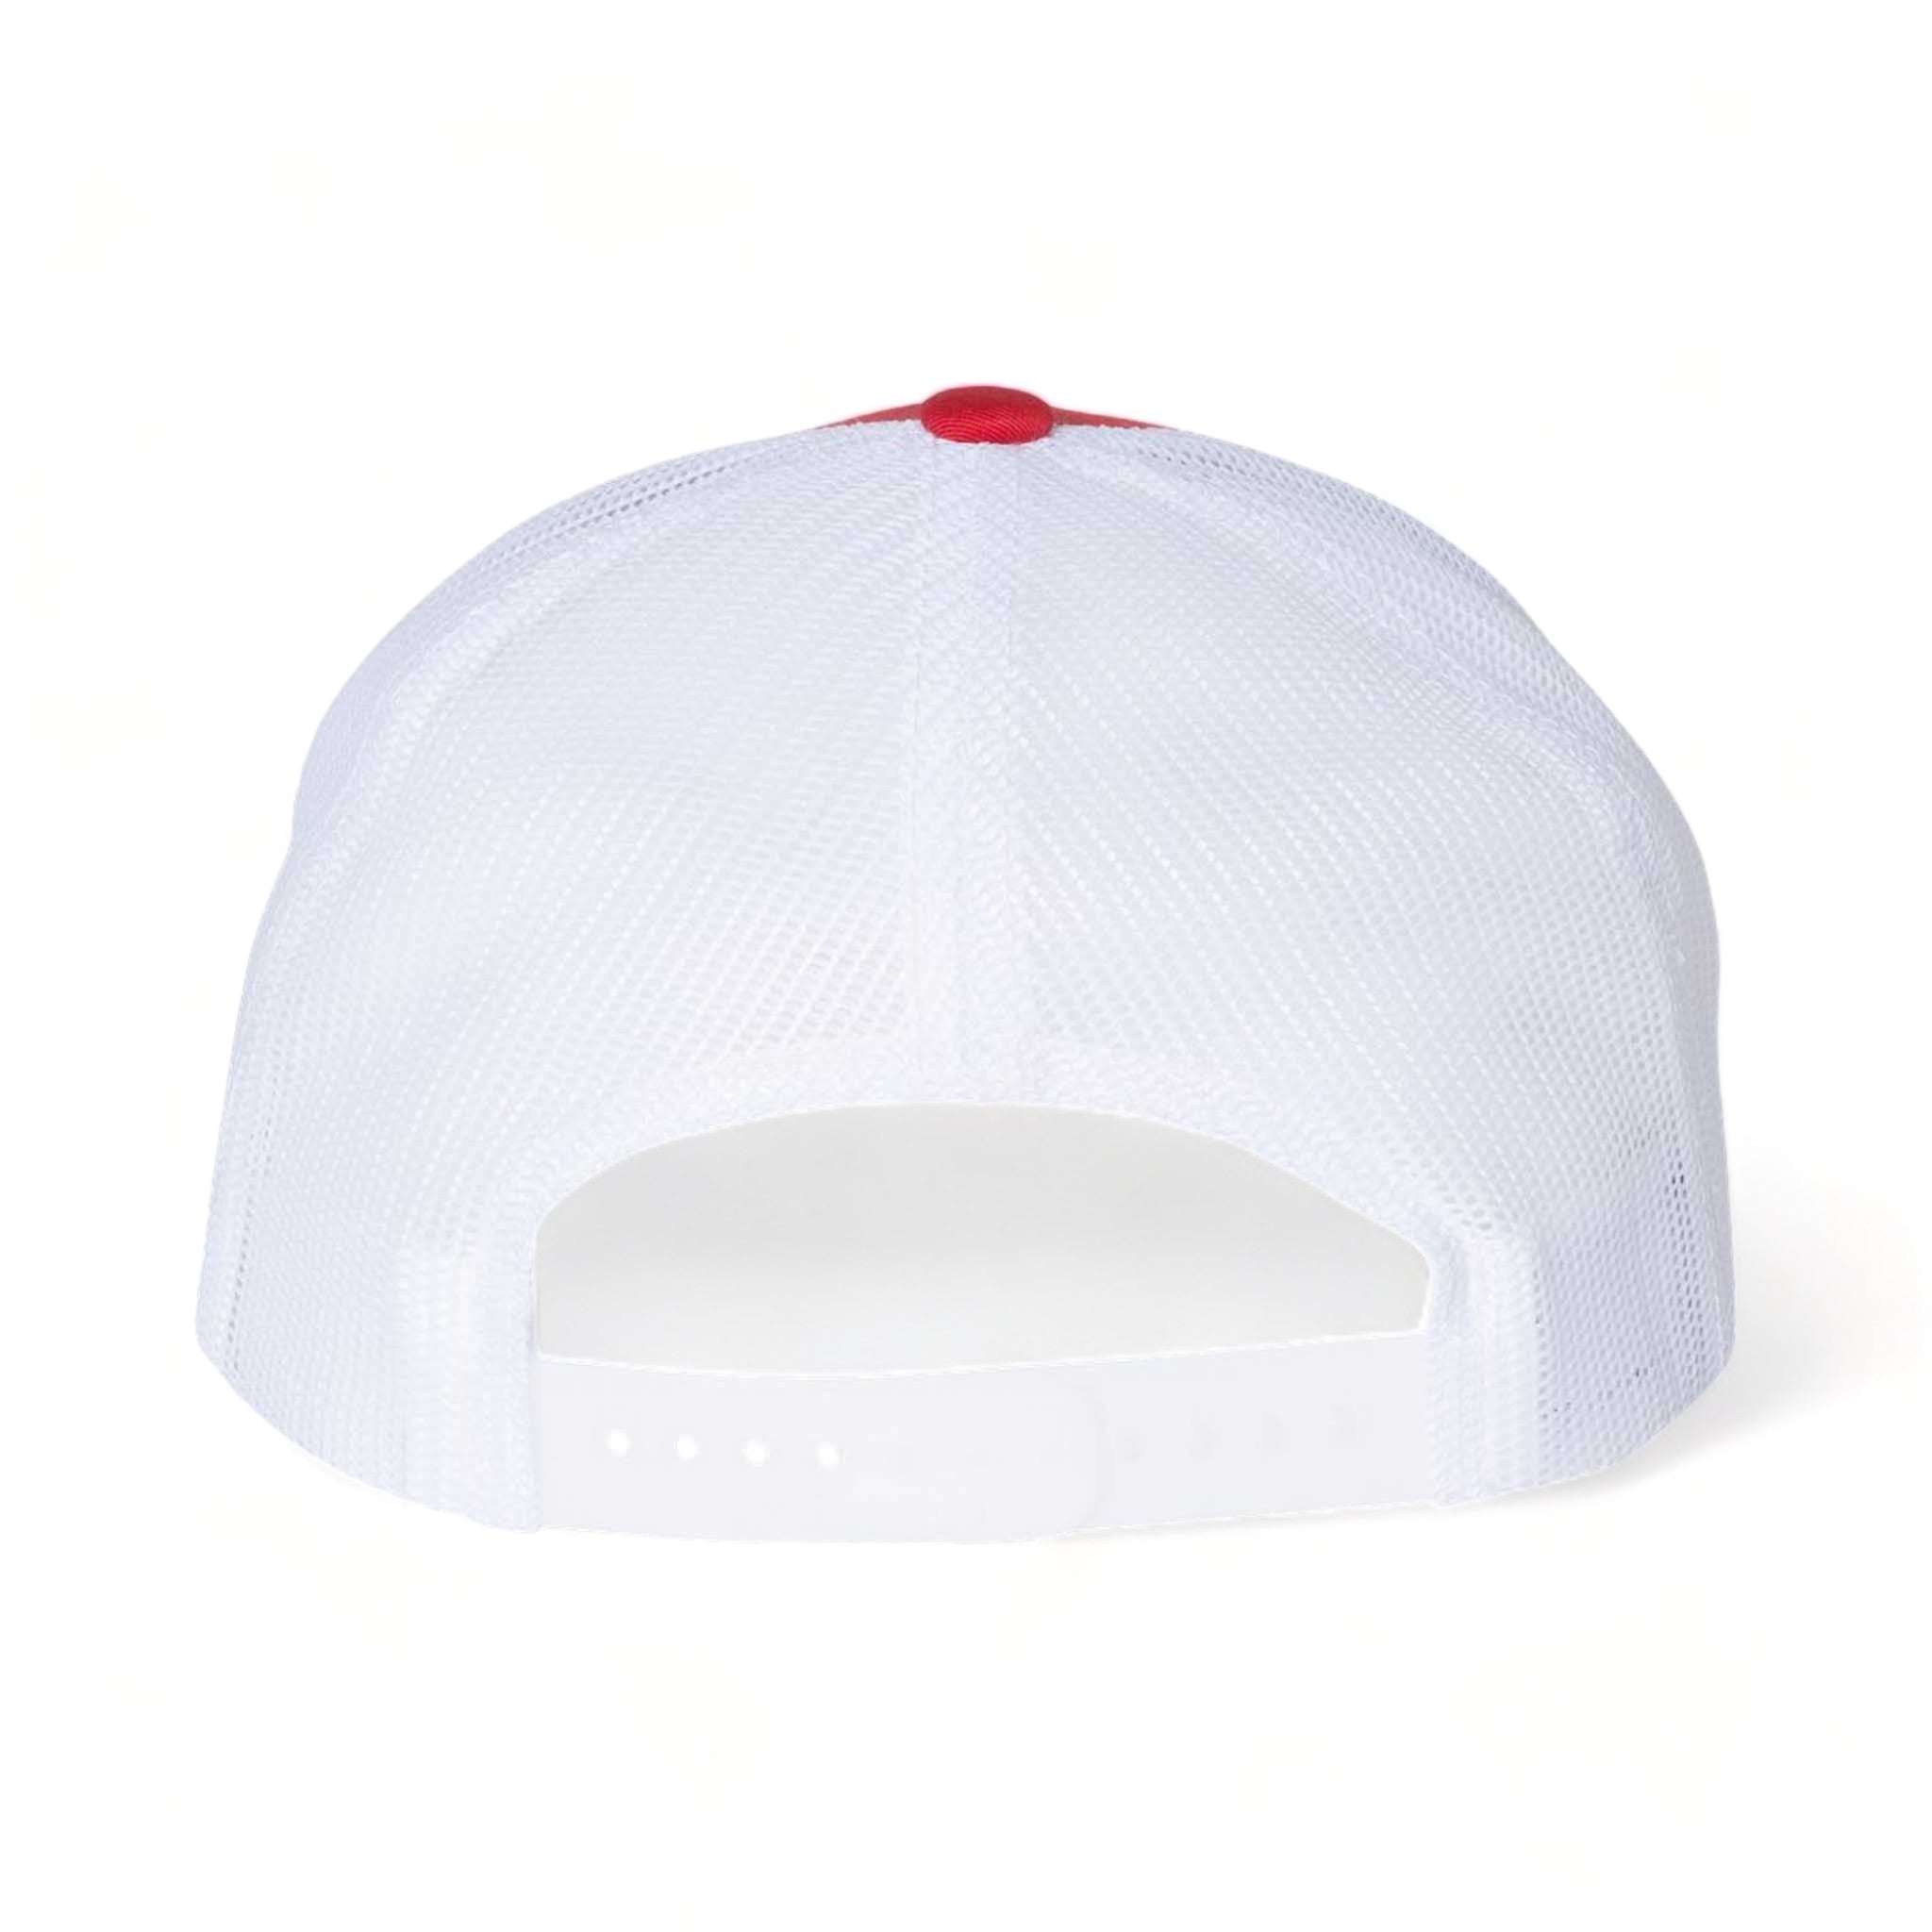 Back view of Richardson 115 custom hat in red and white